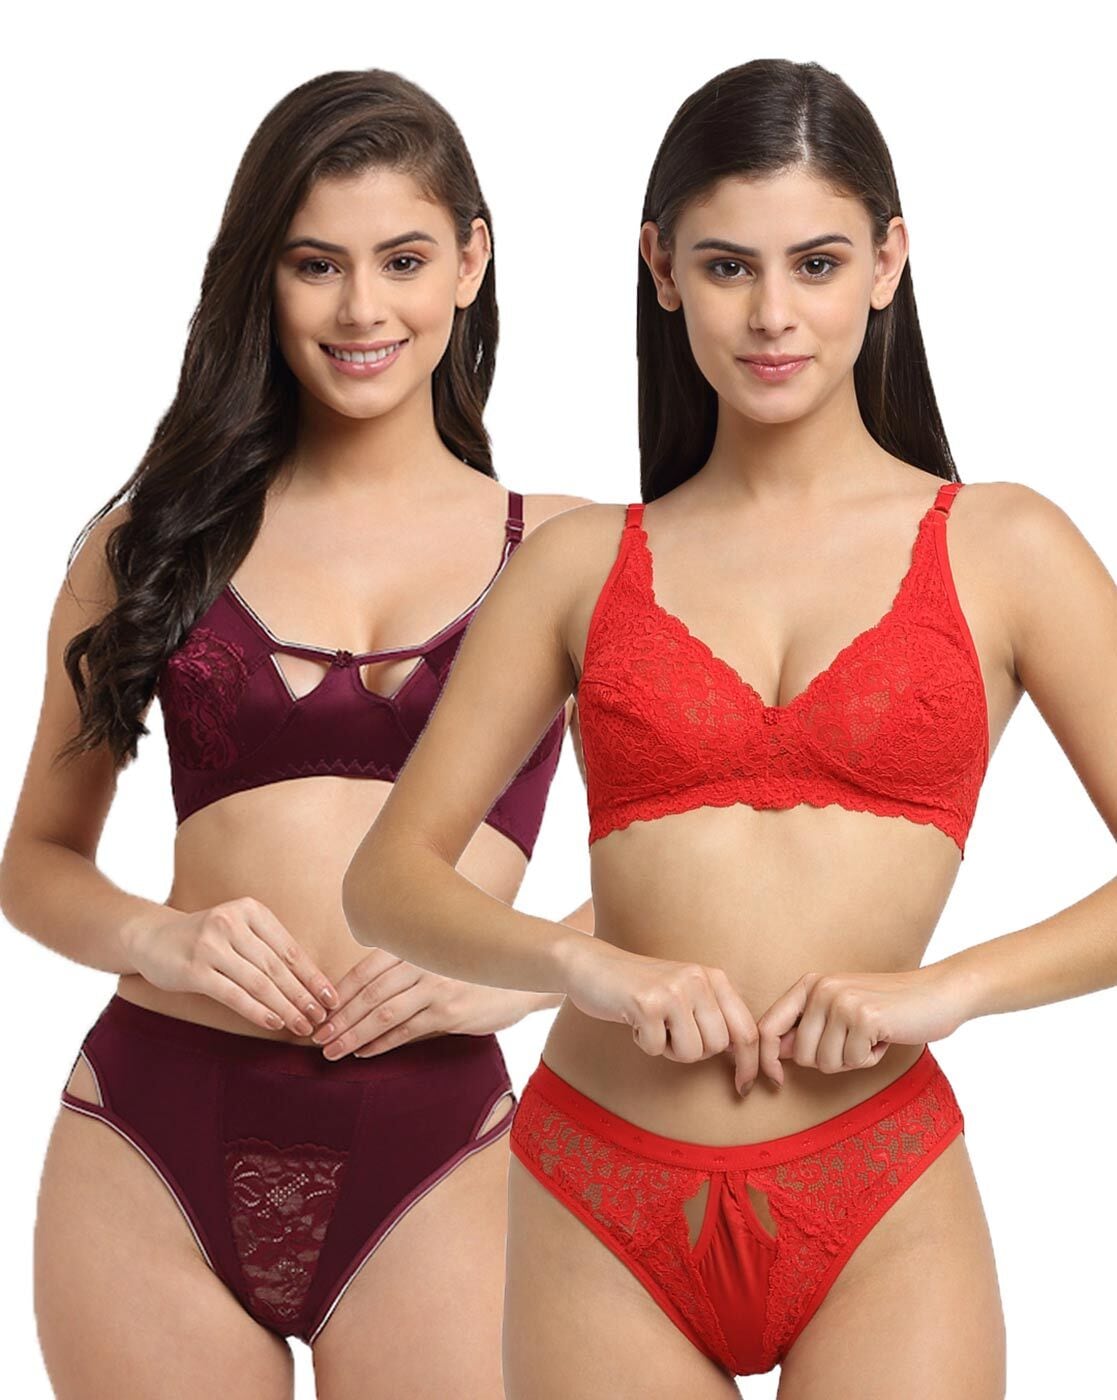 Bras N Things - Red Lace Set With Diamantés on Designer Wardrobe